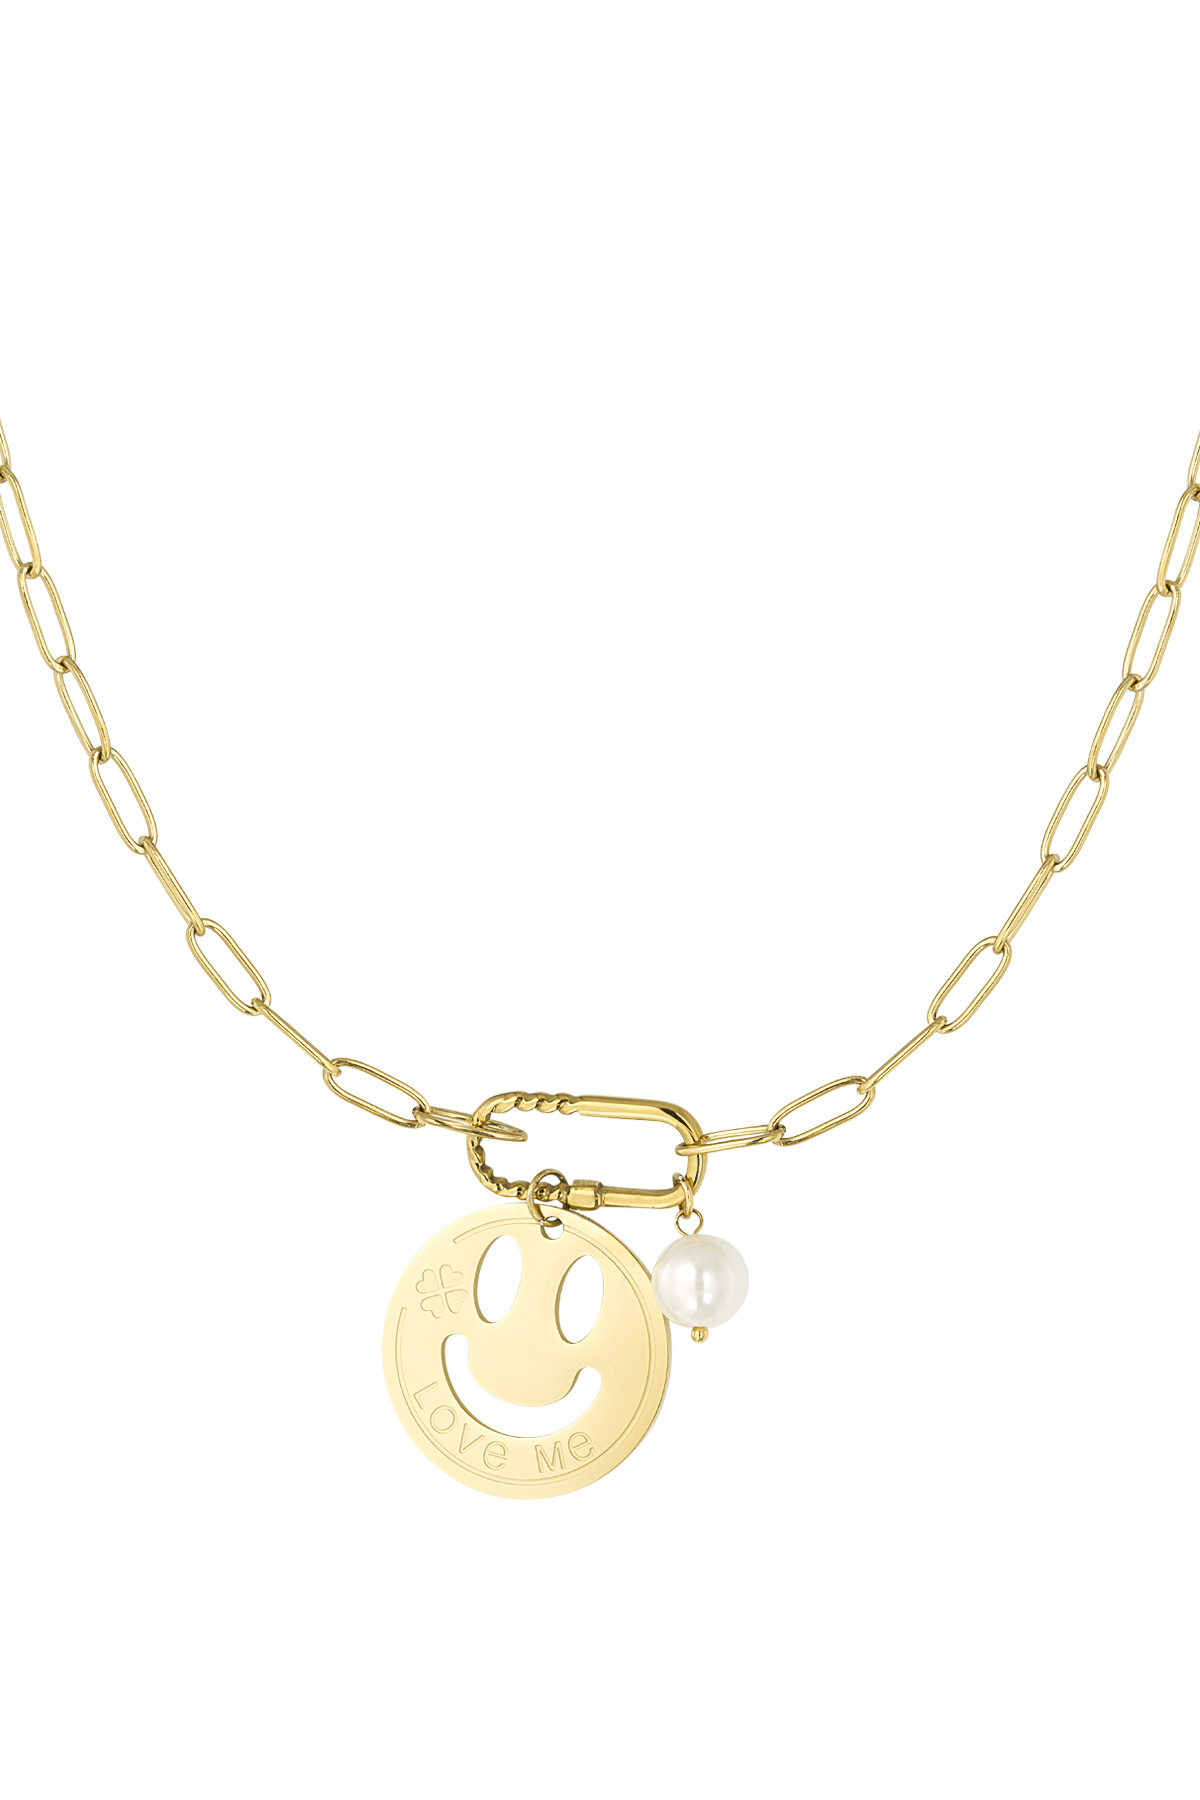 Smiley link necklace - gold 